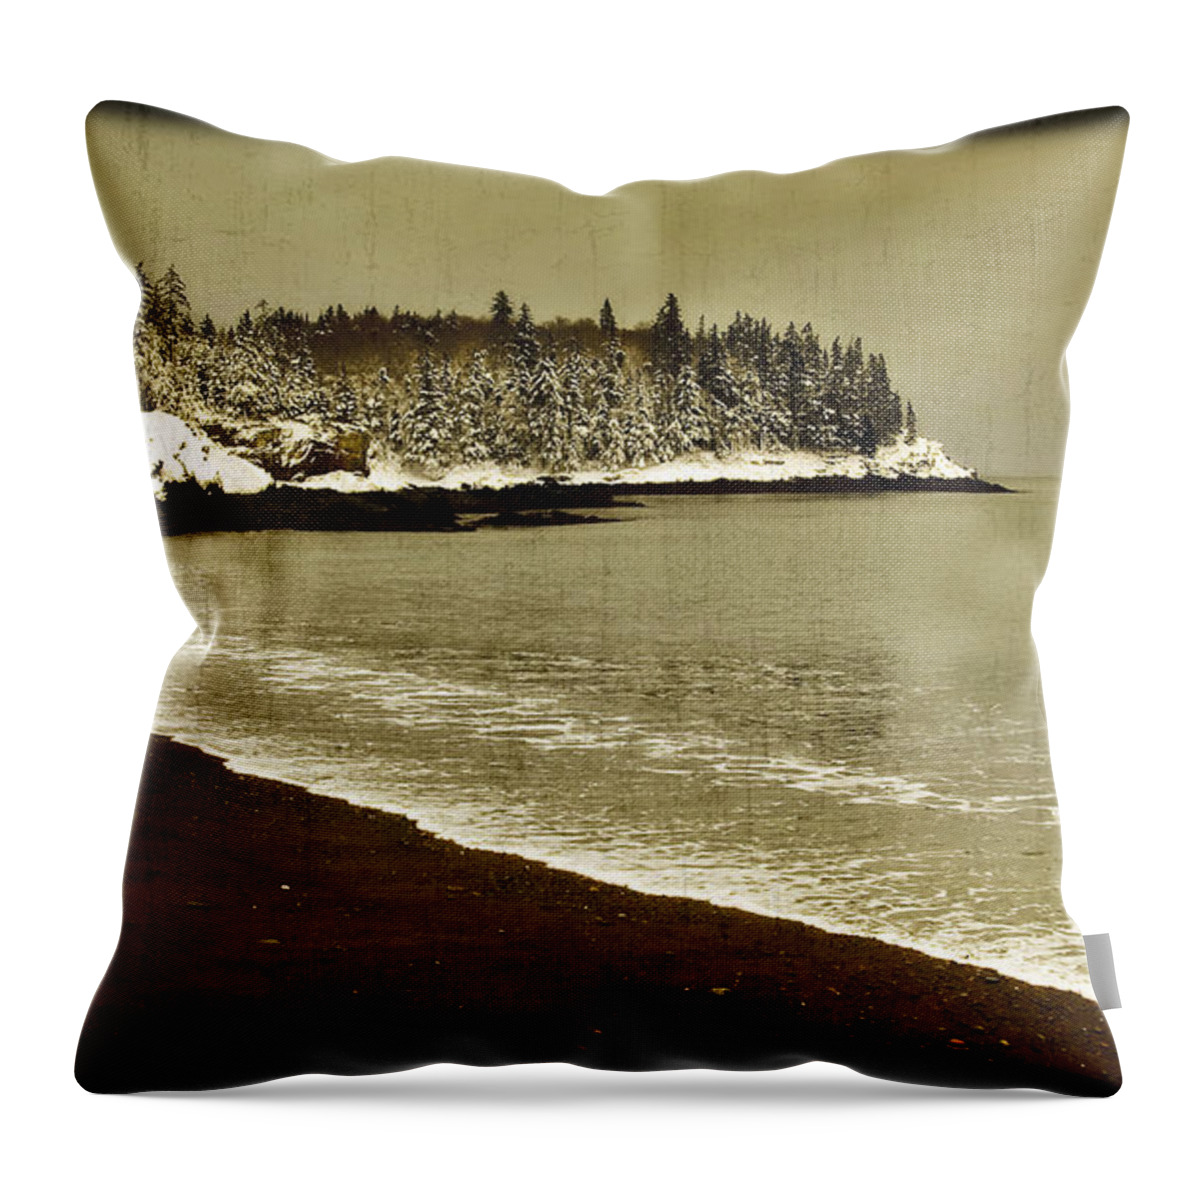 Calm Throw Pillow featuring the photograph Calm Waters by Alana Ranney